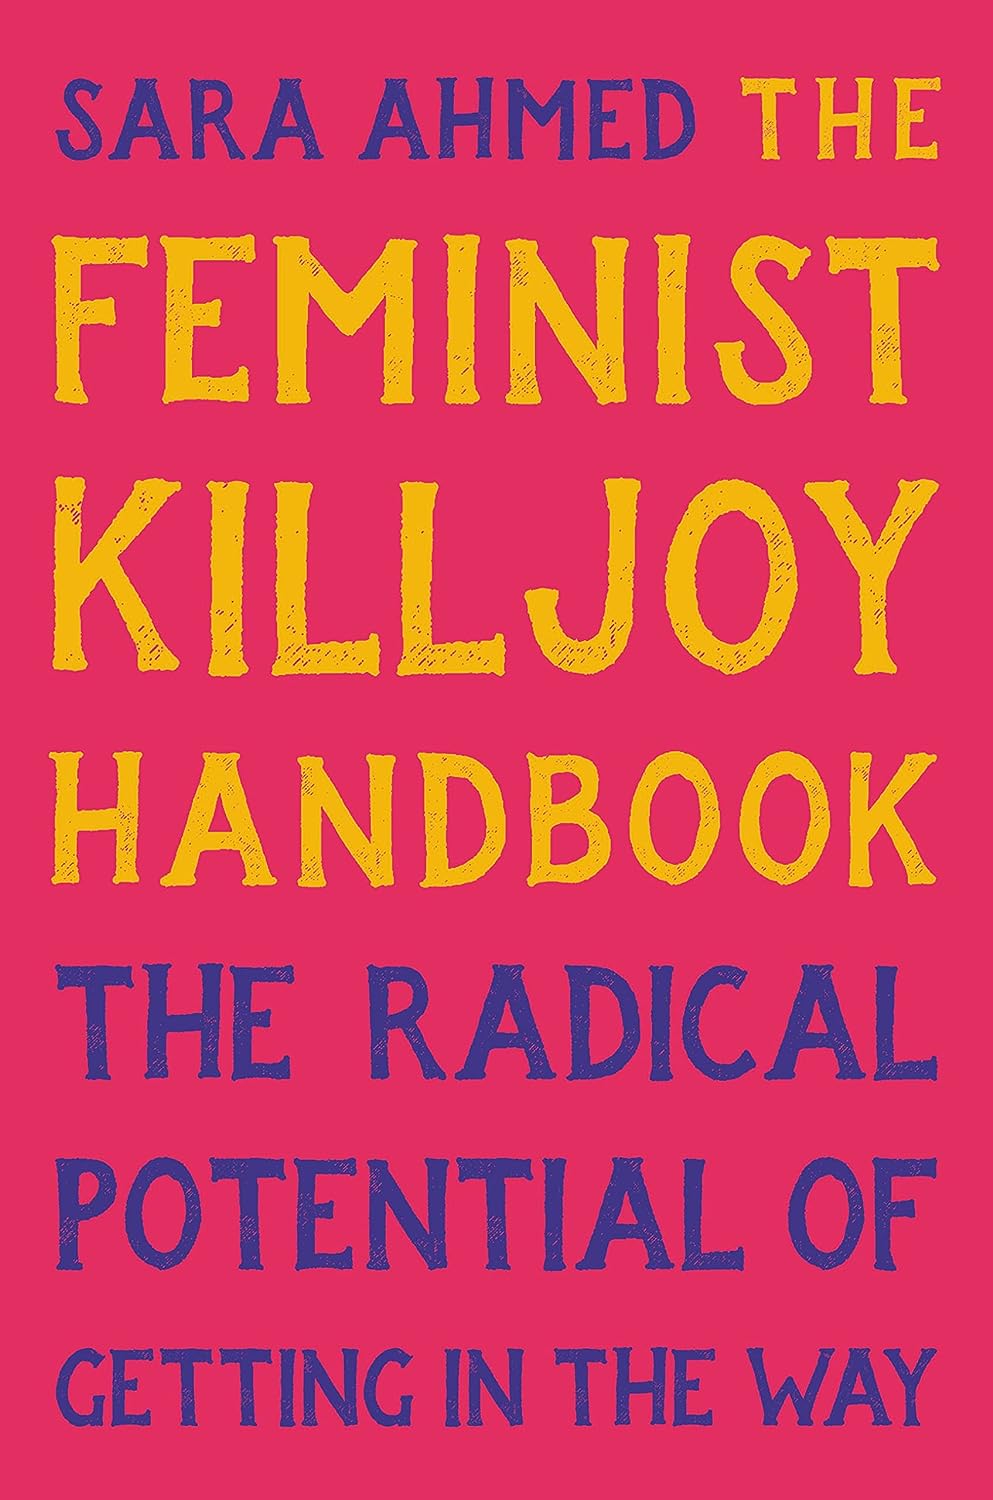 The Feminist Killjoy Handbook: The Radical Potential of Getting in the Way (HC)